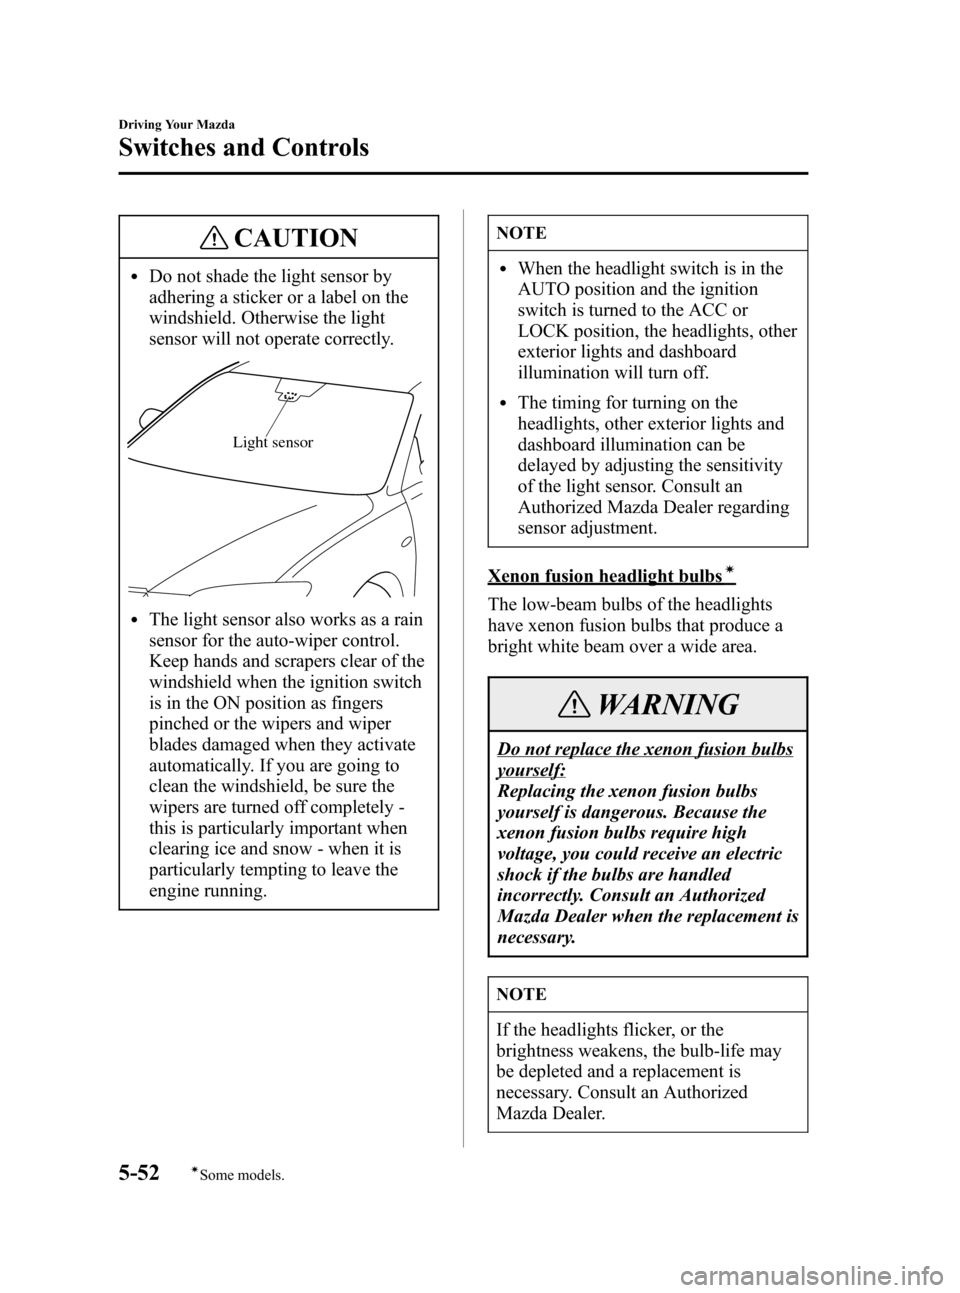 MAZDA MODEL 3 HATCHBACK 2007  Owners Manual (in English) Black plate (174,1)
CAUTION
lDo not shade the light sensor by
adhering a sticker or a label on the
windshield. Otherwise the light
sensor will not operate correctly.
Light sensor
lThe light sensor als